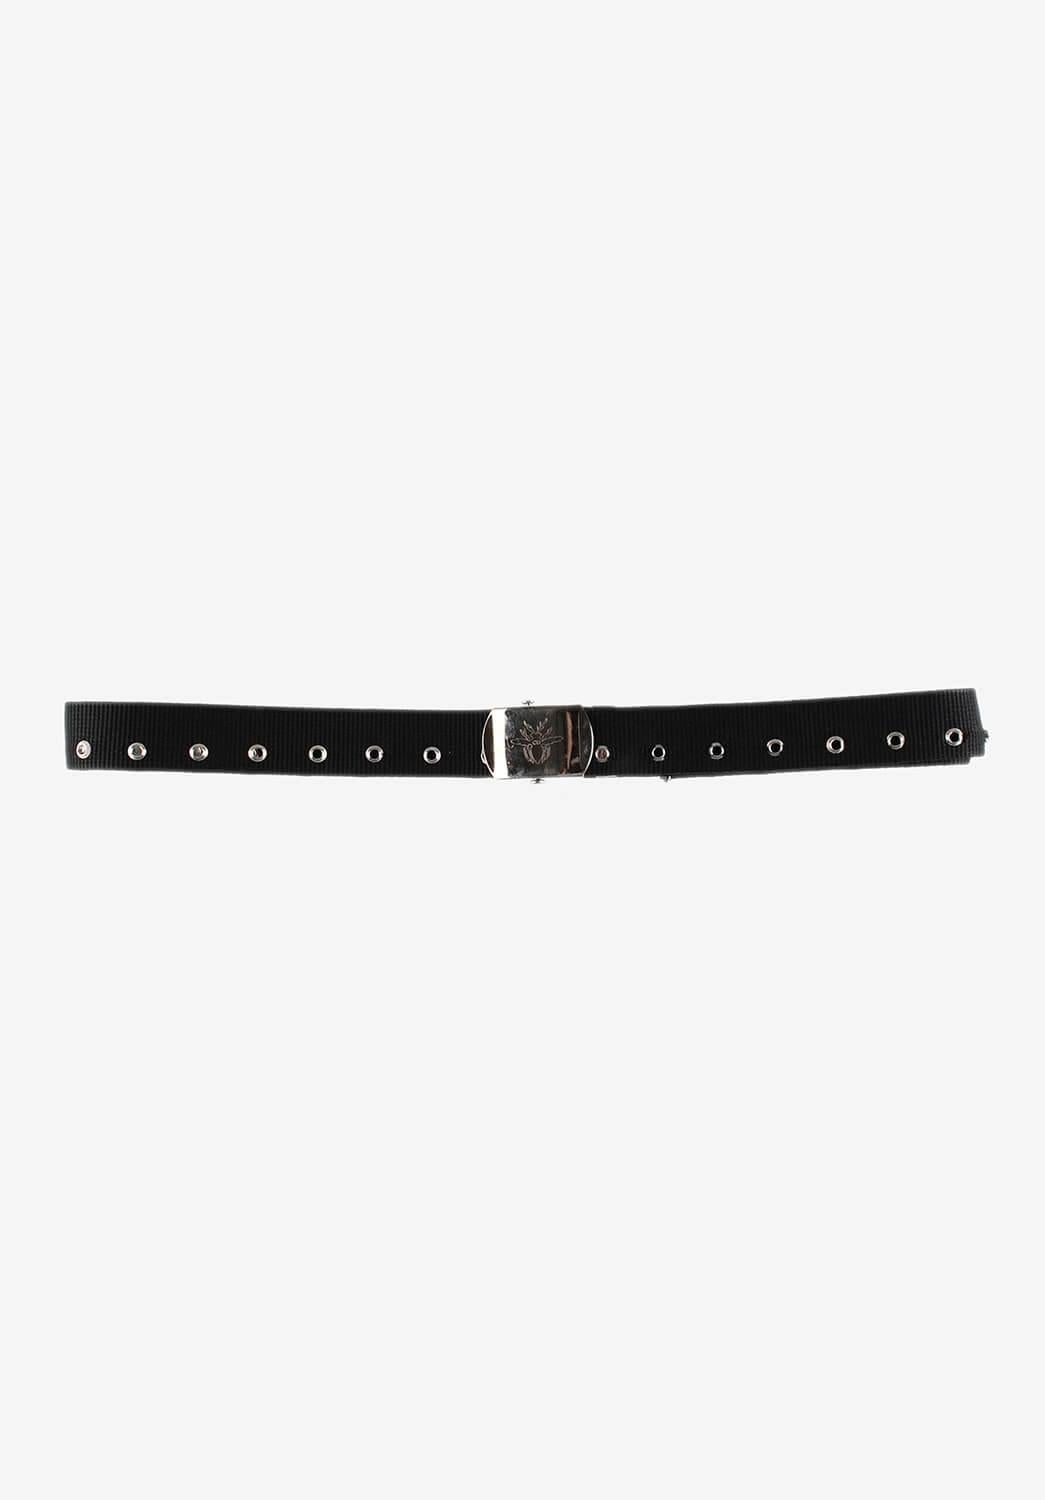 Item for sale is 100% genuine Dior Homme AW03 Luster Belt
Color: Black
(An actual color may a bit vary due to individual computer screen interpretation)
Material: Cloth, metal
Tag size: M/L
This belt is great quality item. Rate 8.5 of 10, very good